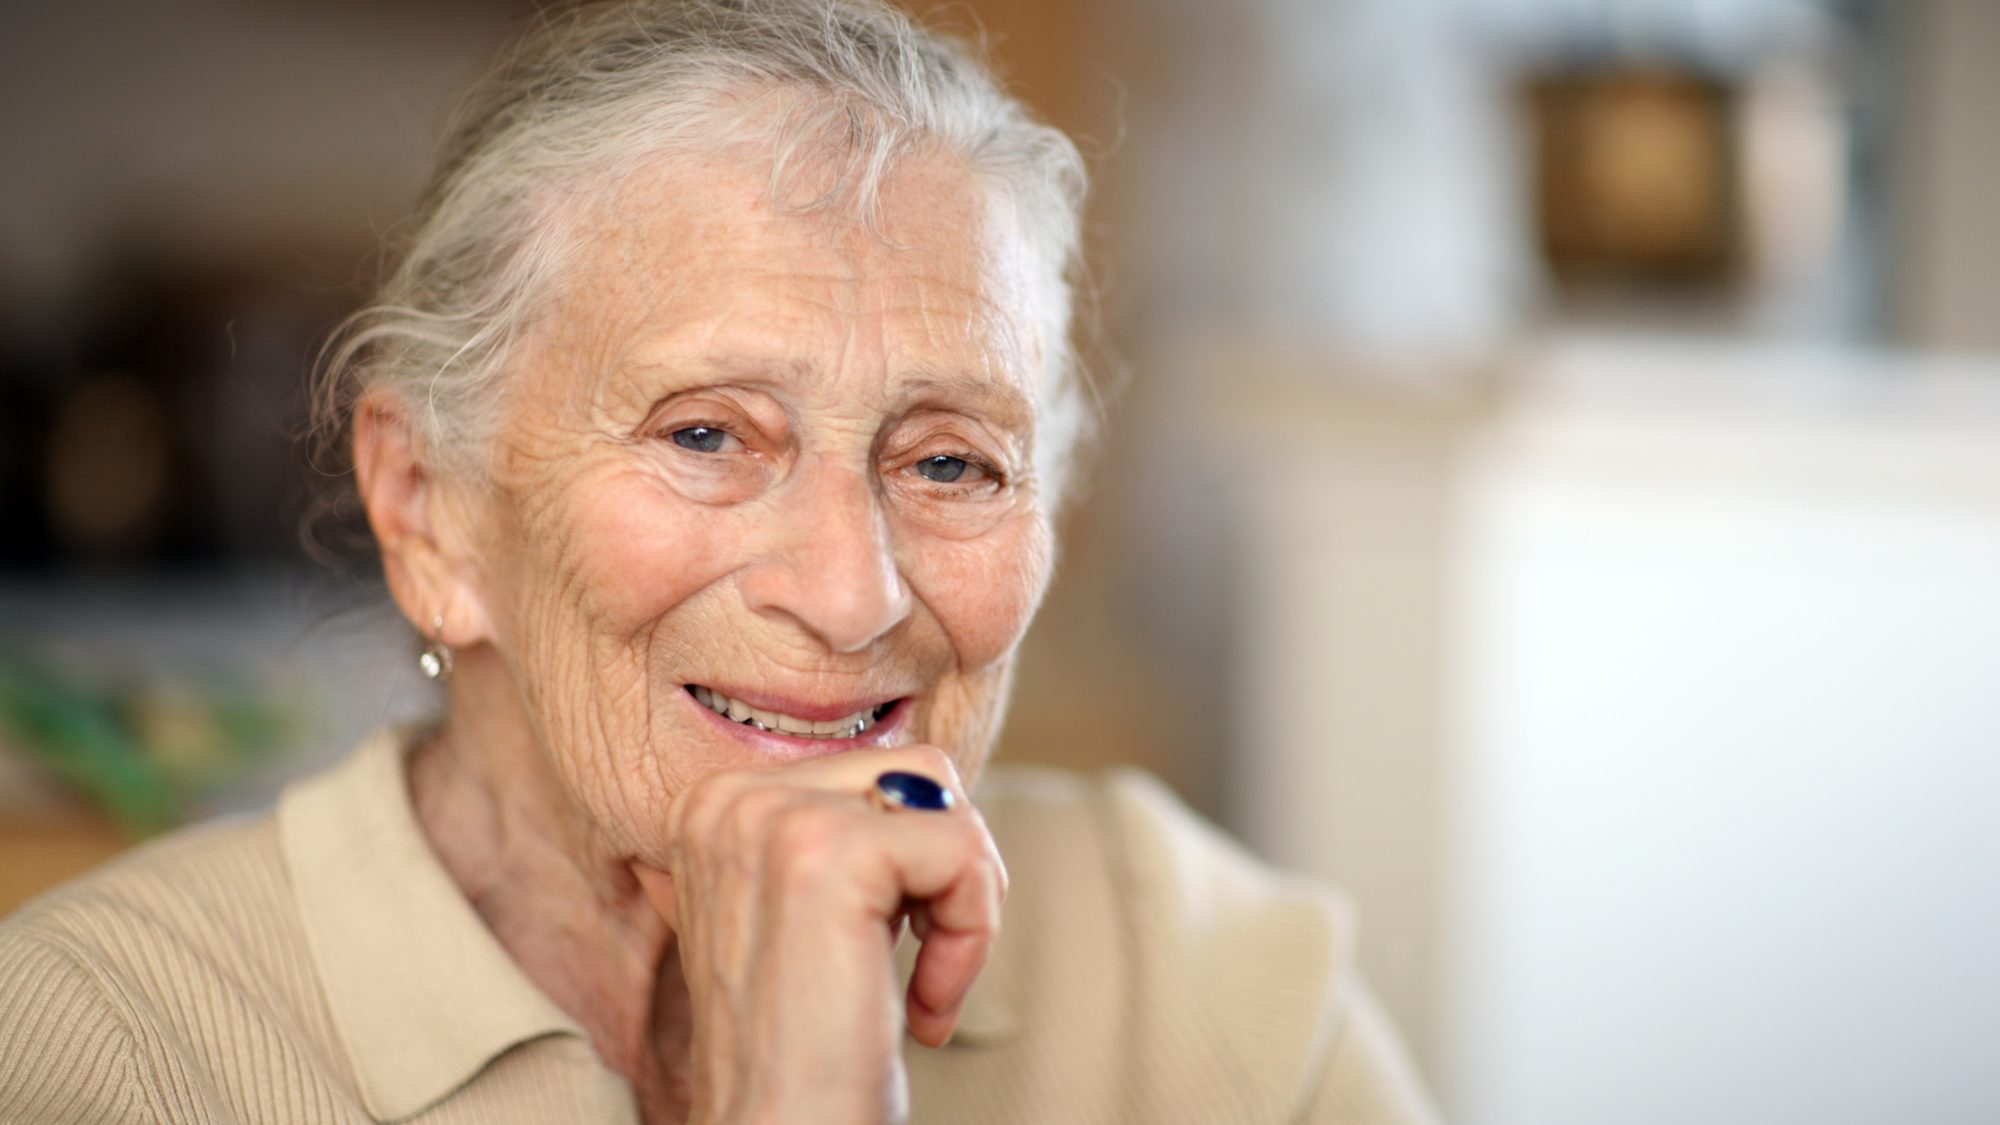 An older white woman smiling at the camera with her hand on her chin